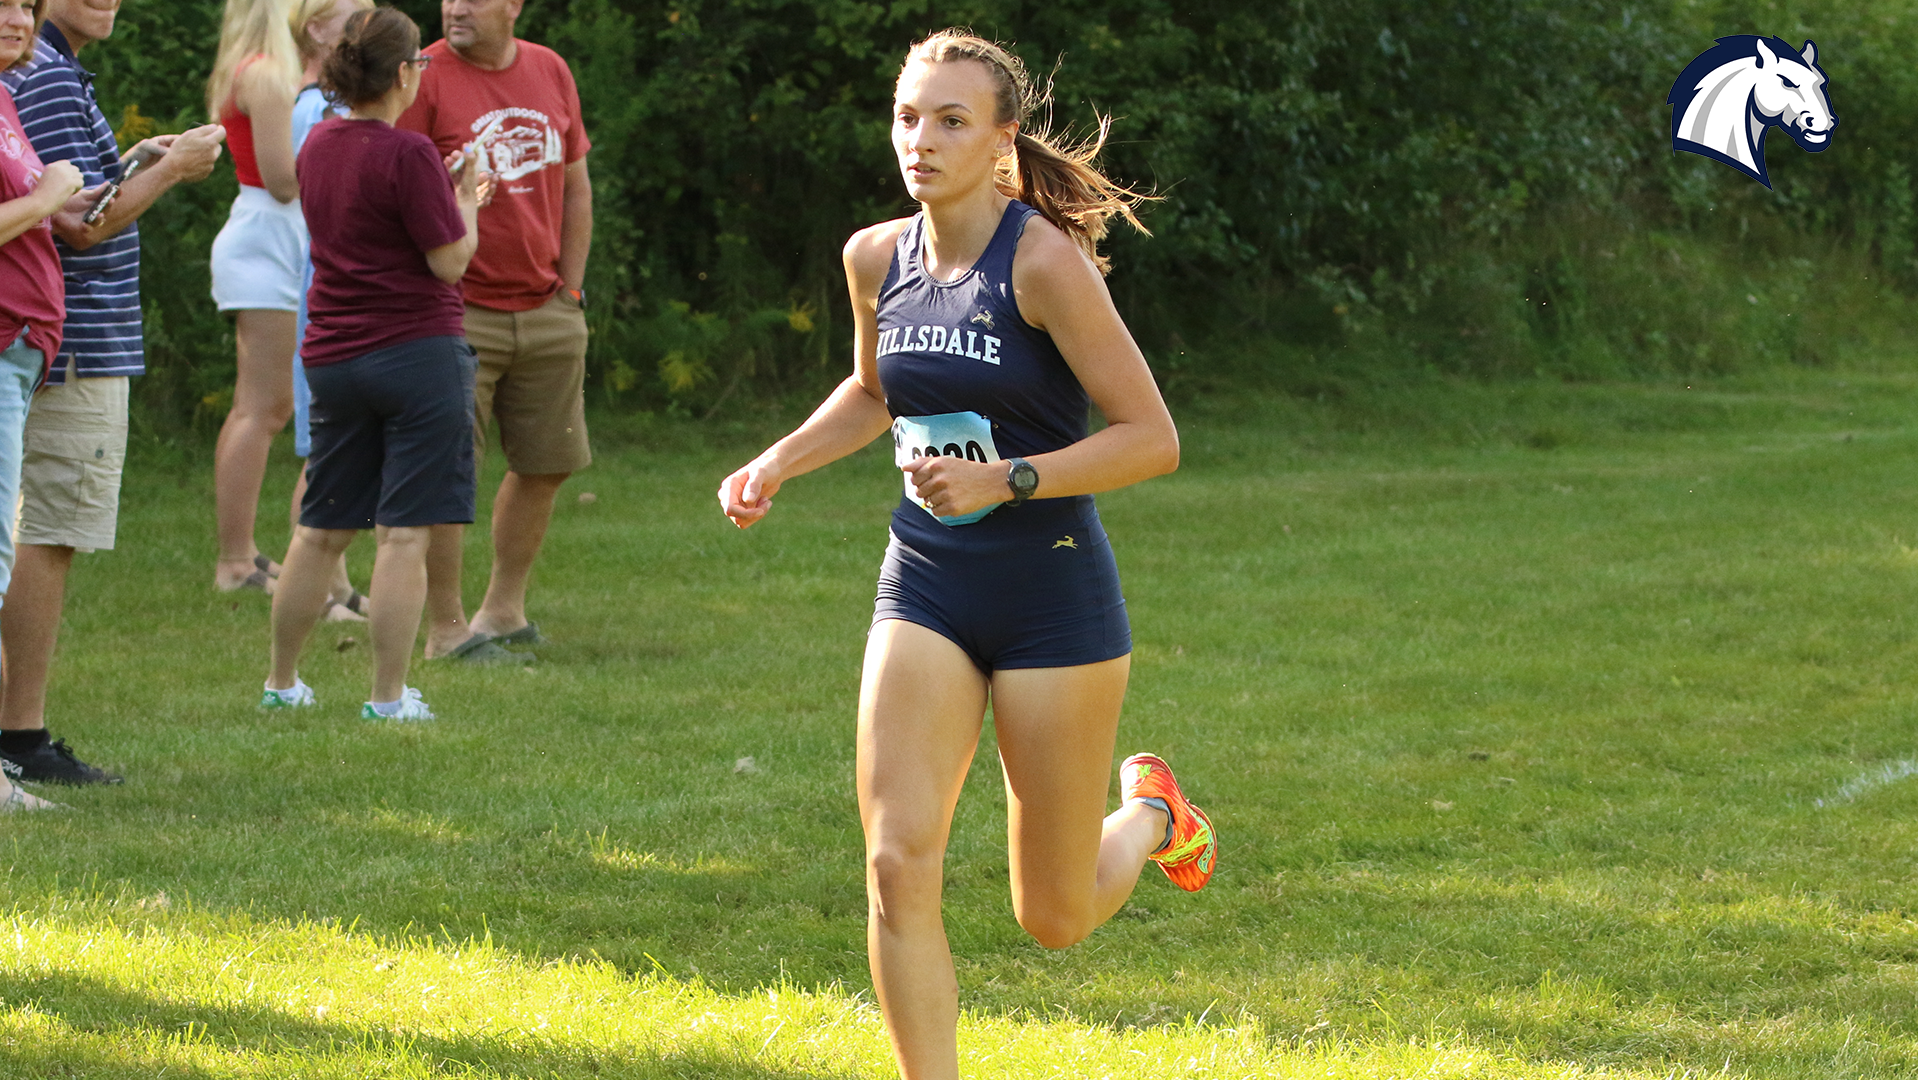 Hillsdale's Wamsley wins Warrior Challenge; Chargers take third as a team